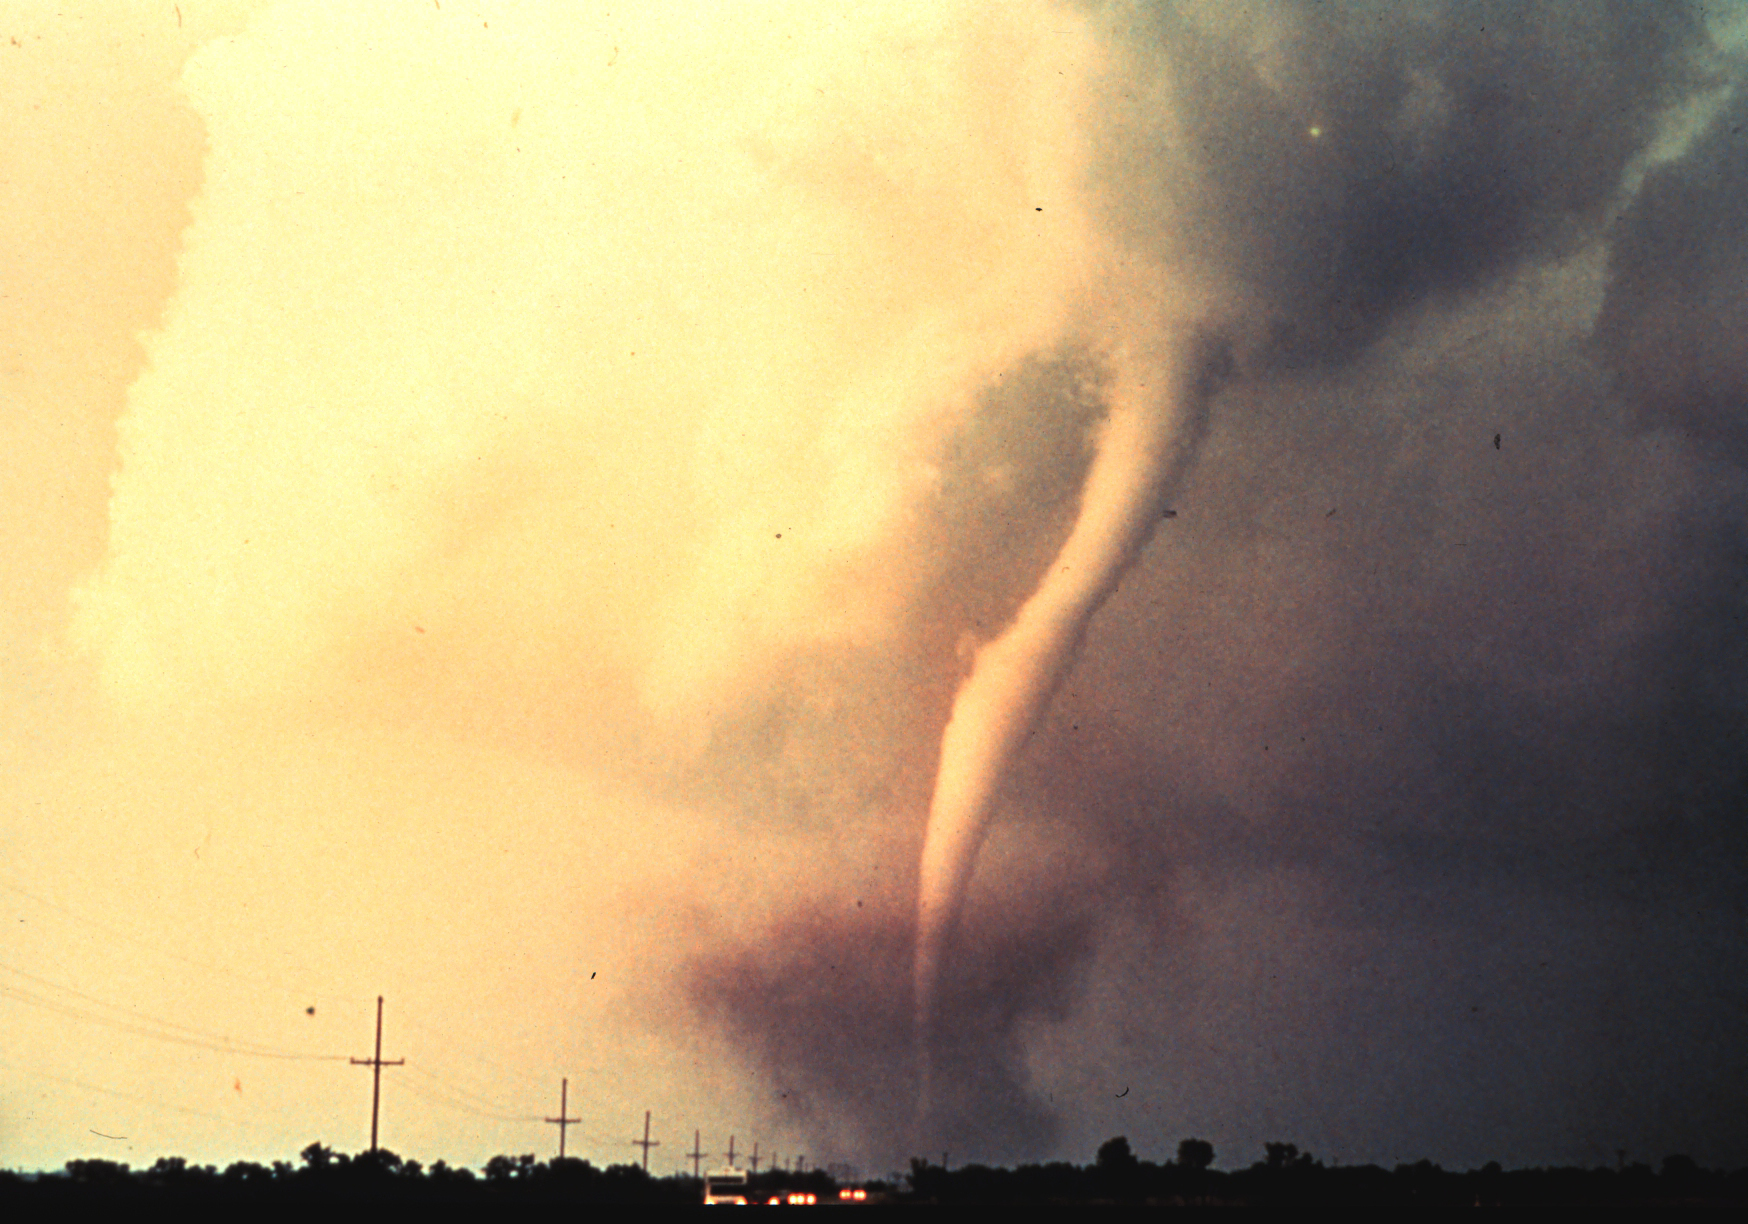 May 24, 1973 Union City, OK Tornado Photo is provided courtesy of the NSSL and the NOAA Photo Library